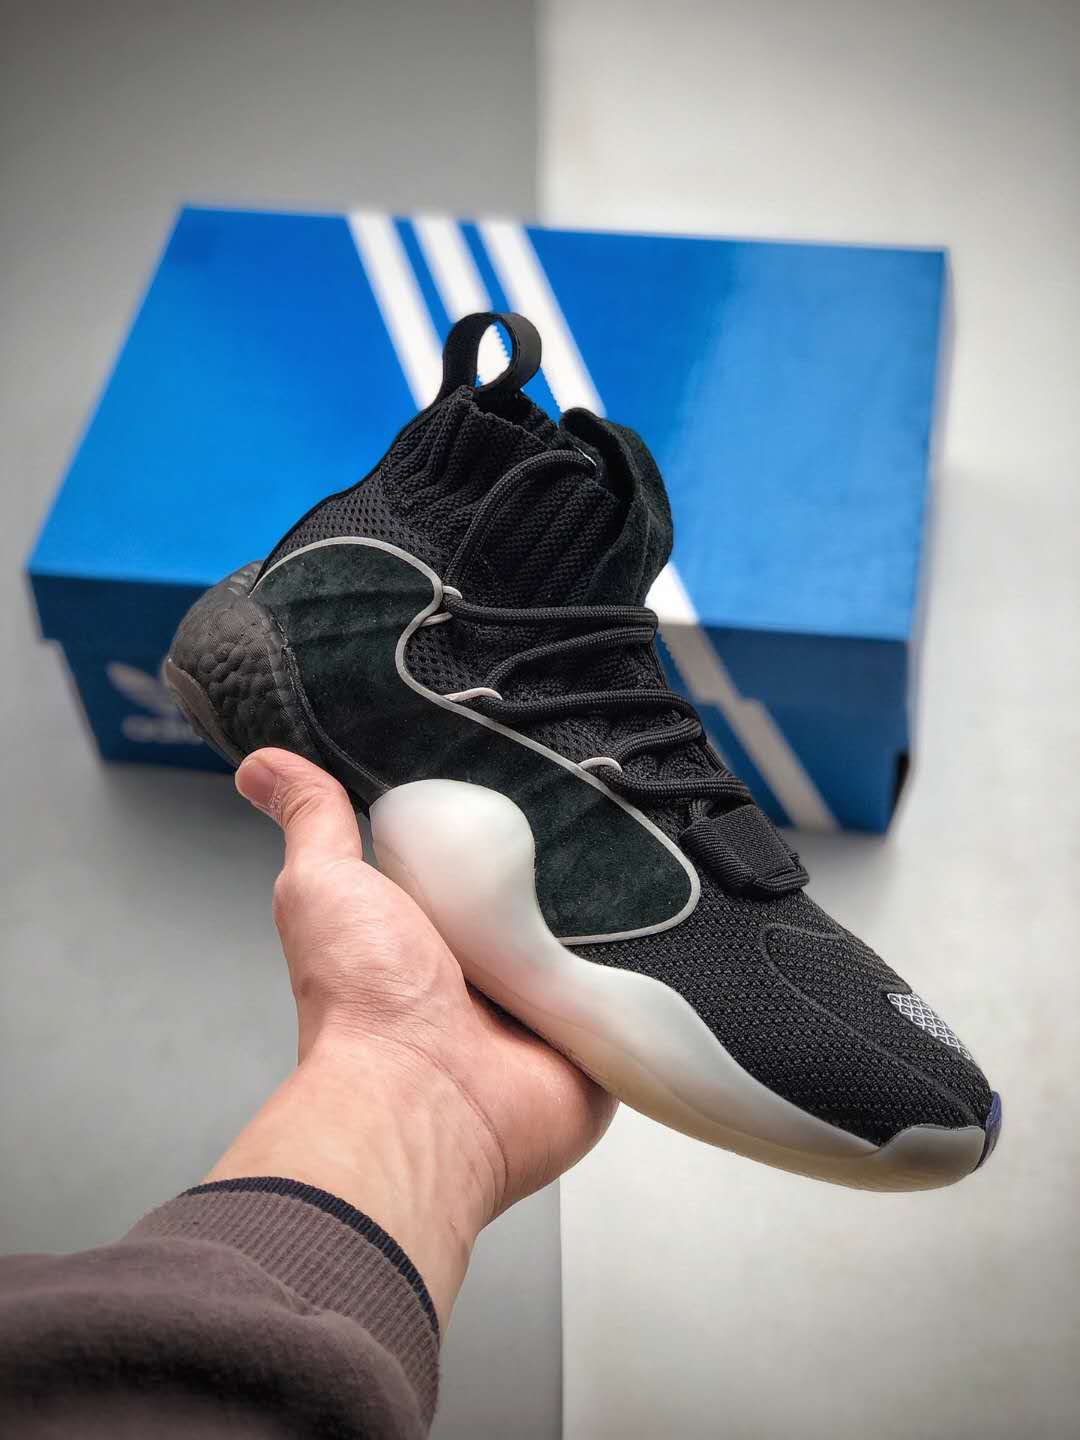 Adidas Crazy BYW X Black White B41858 - Classic Style and Unmatched Comfort